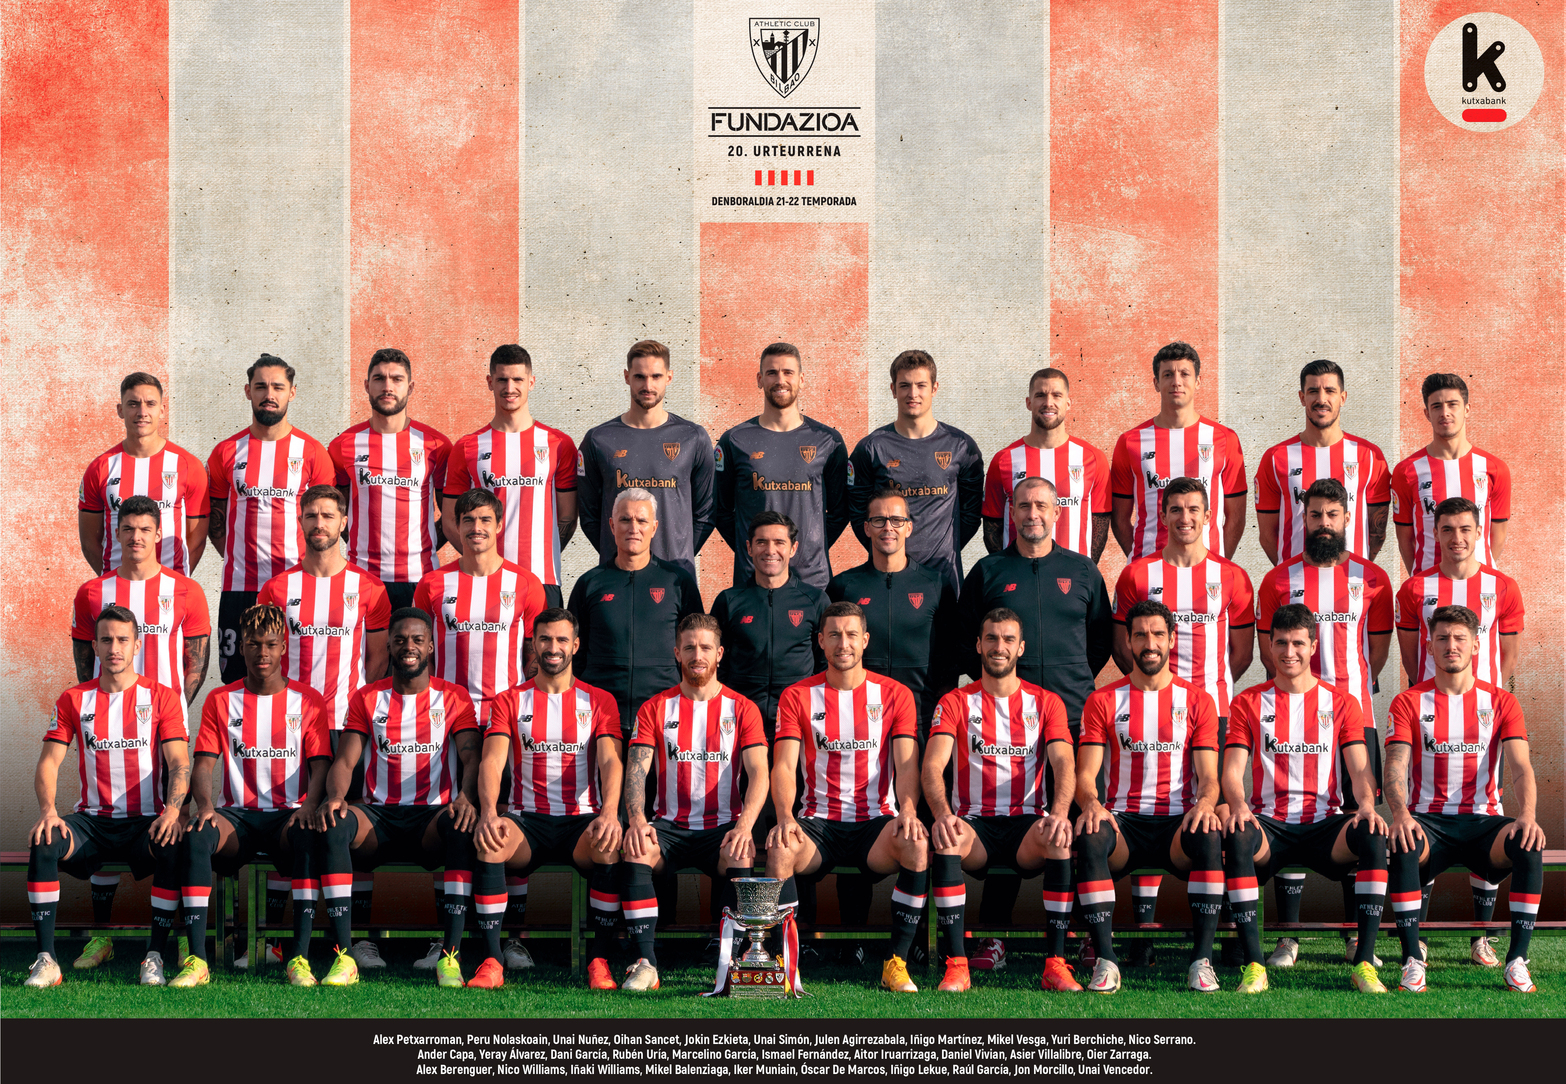 Athletic Club - Athletic Club's Official Website, athletic bilbao